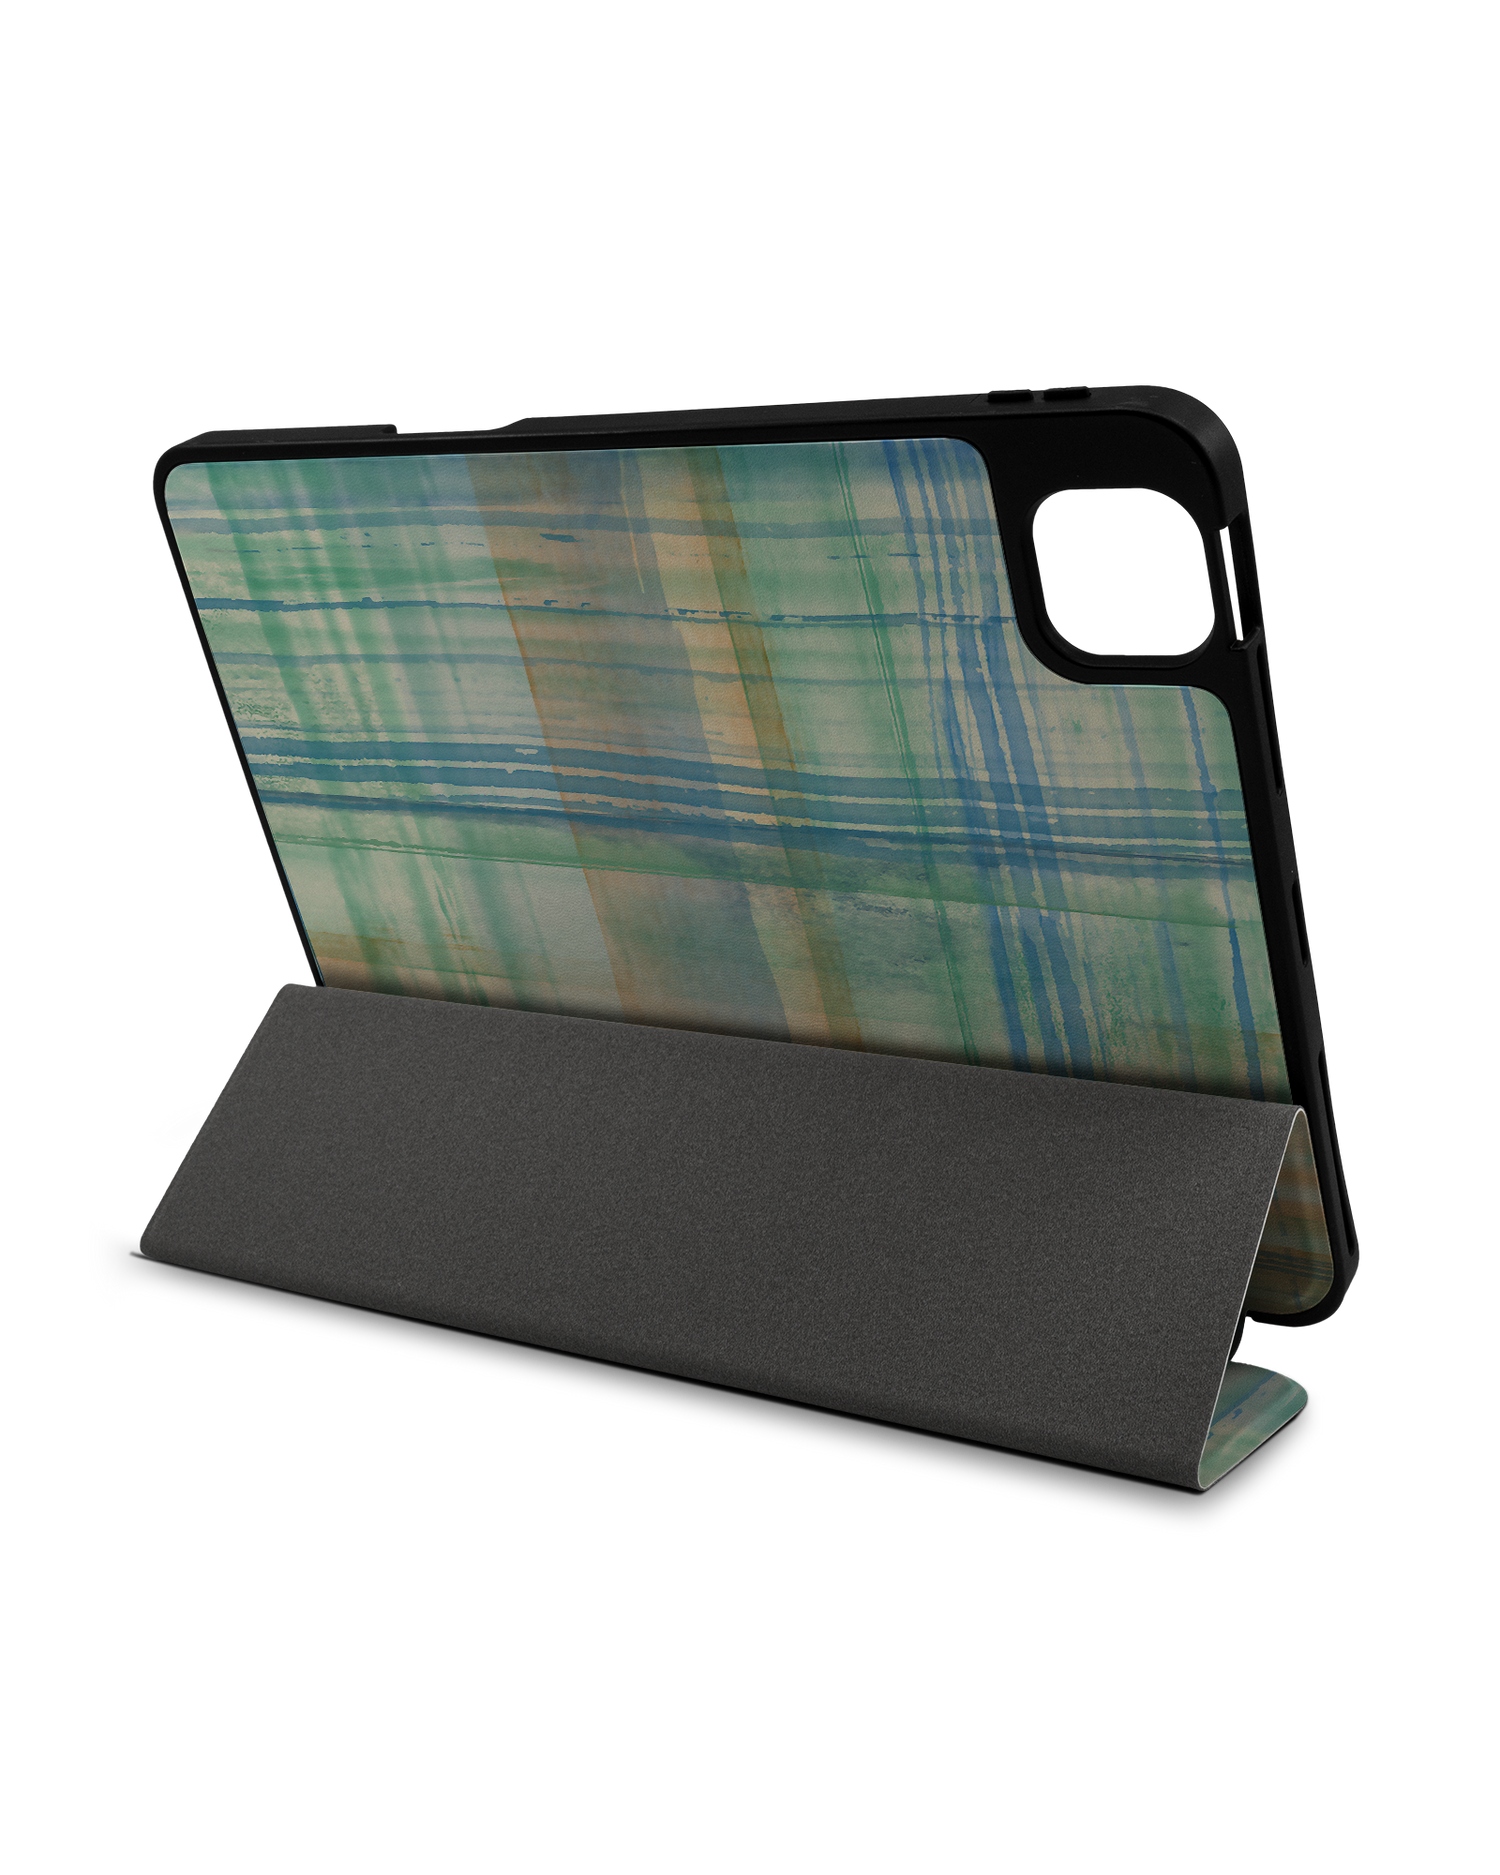 Washed Out Plaid iPad Case with Pencil Holder Apple iPad Pro 11